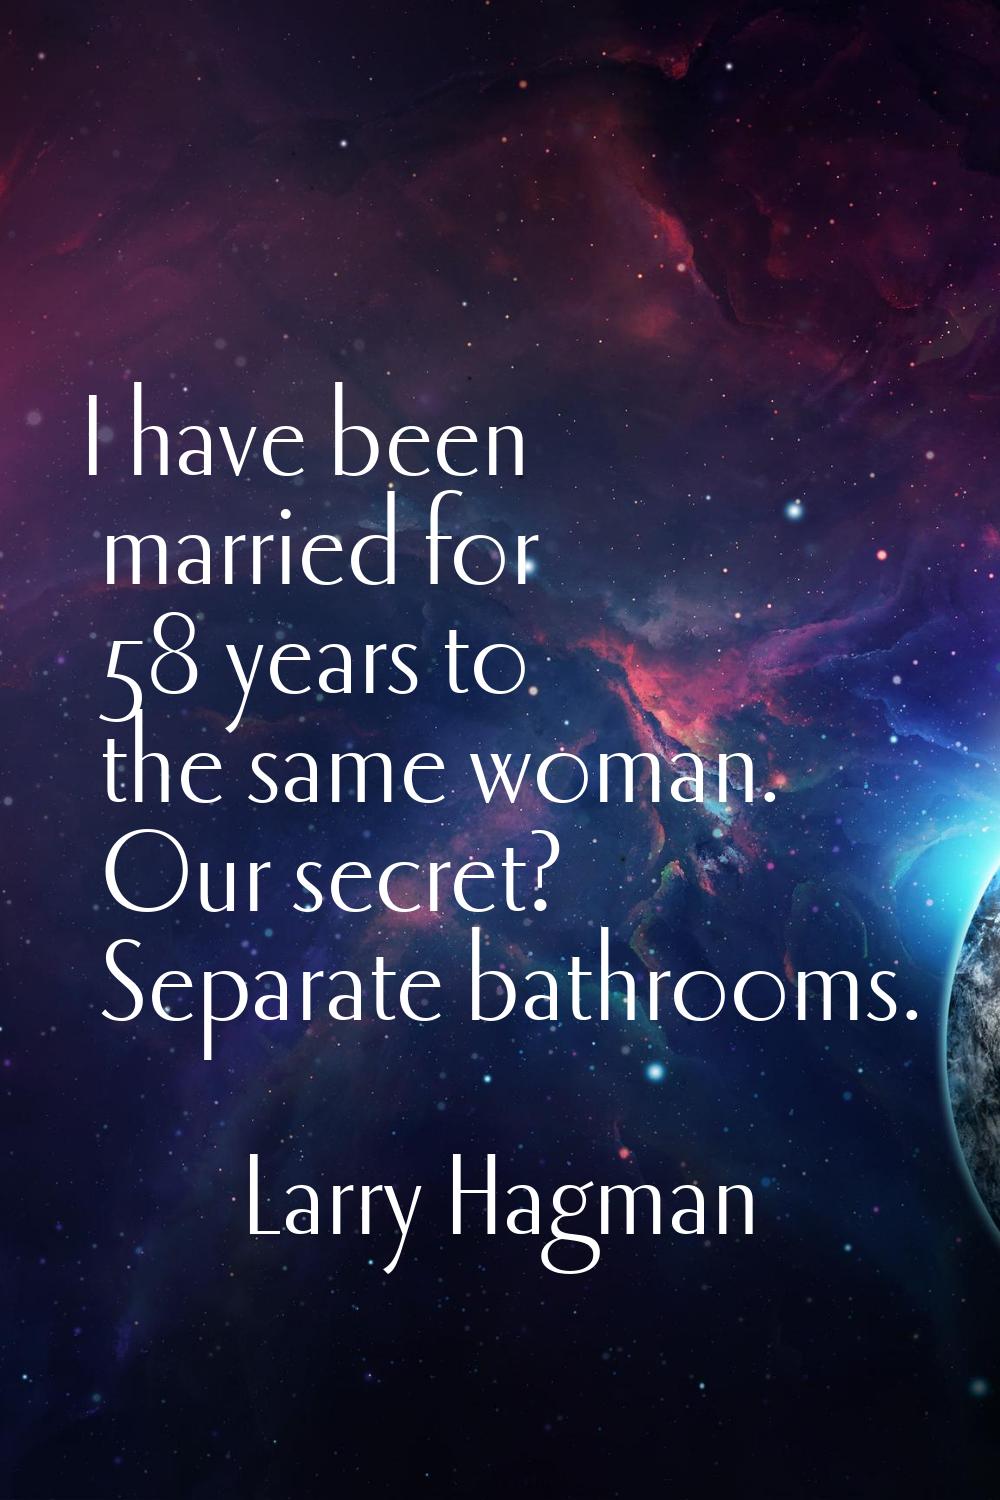 I have been married for 58 years to the same woman. Our secret? Separate bathrooms.